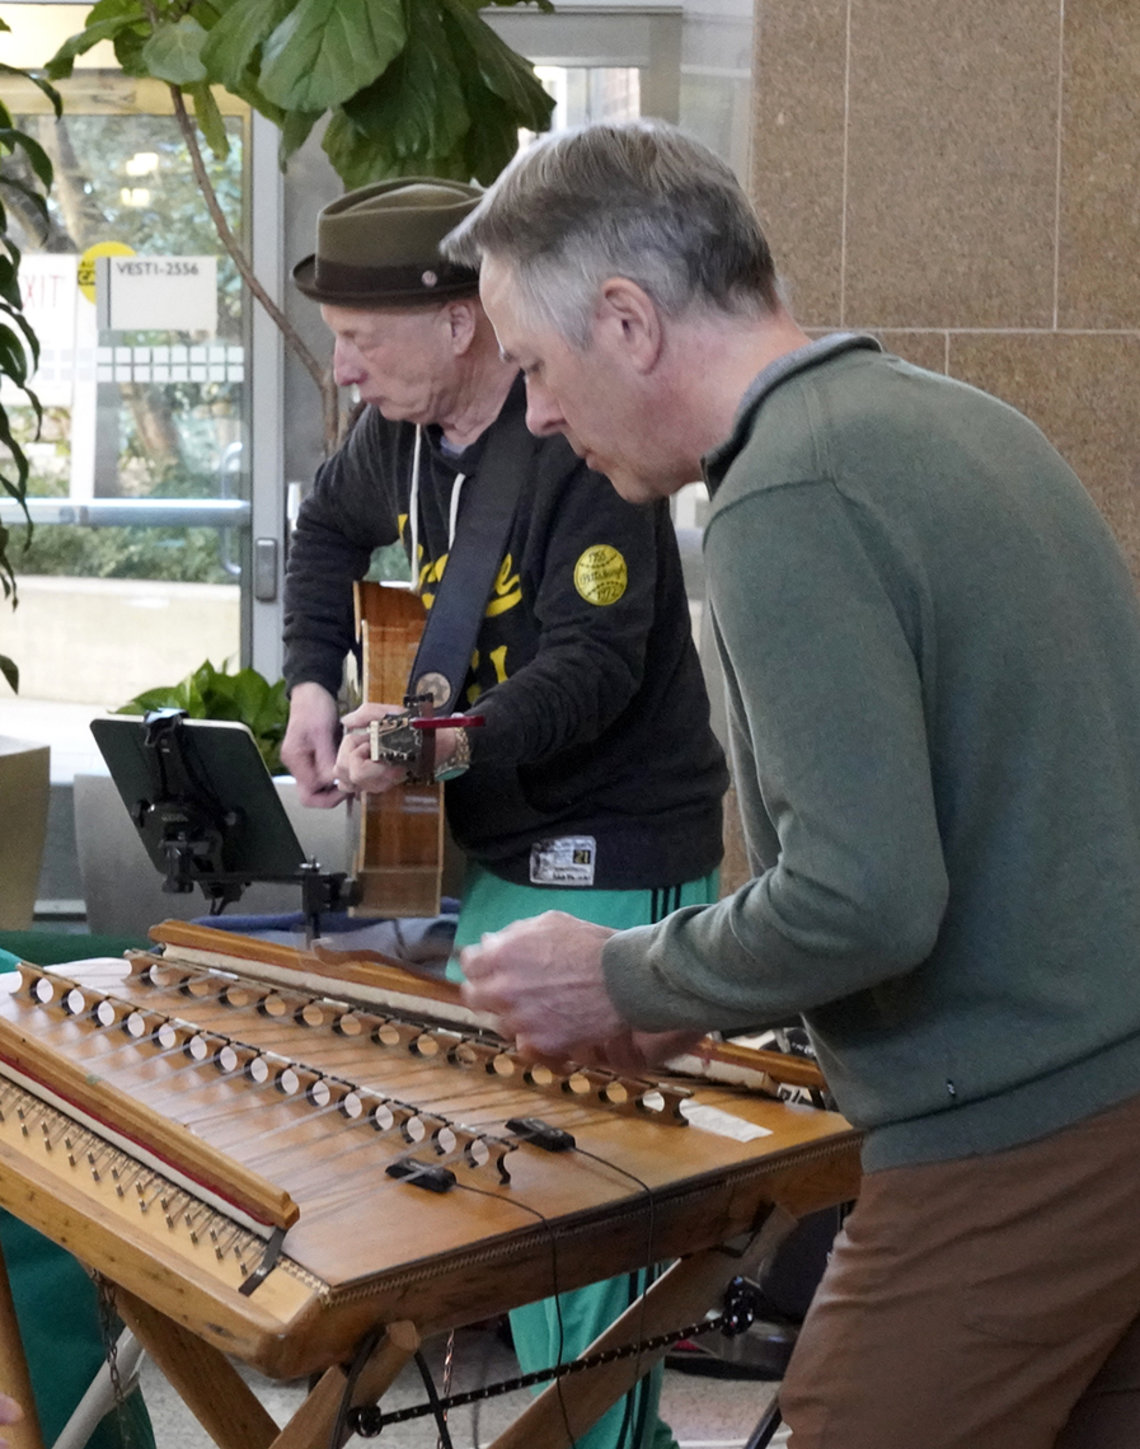 A man plays the hammered dulcimer. Another man plays the guitar in the background.